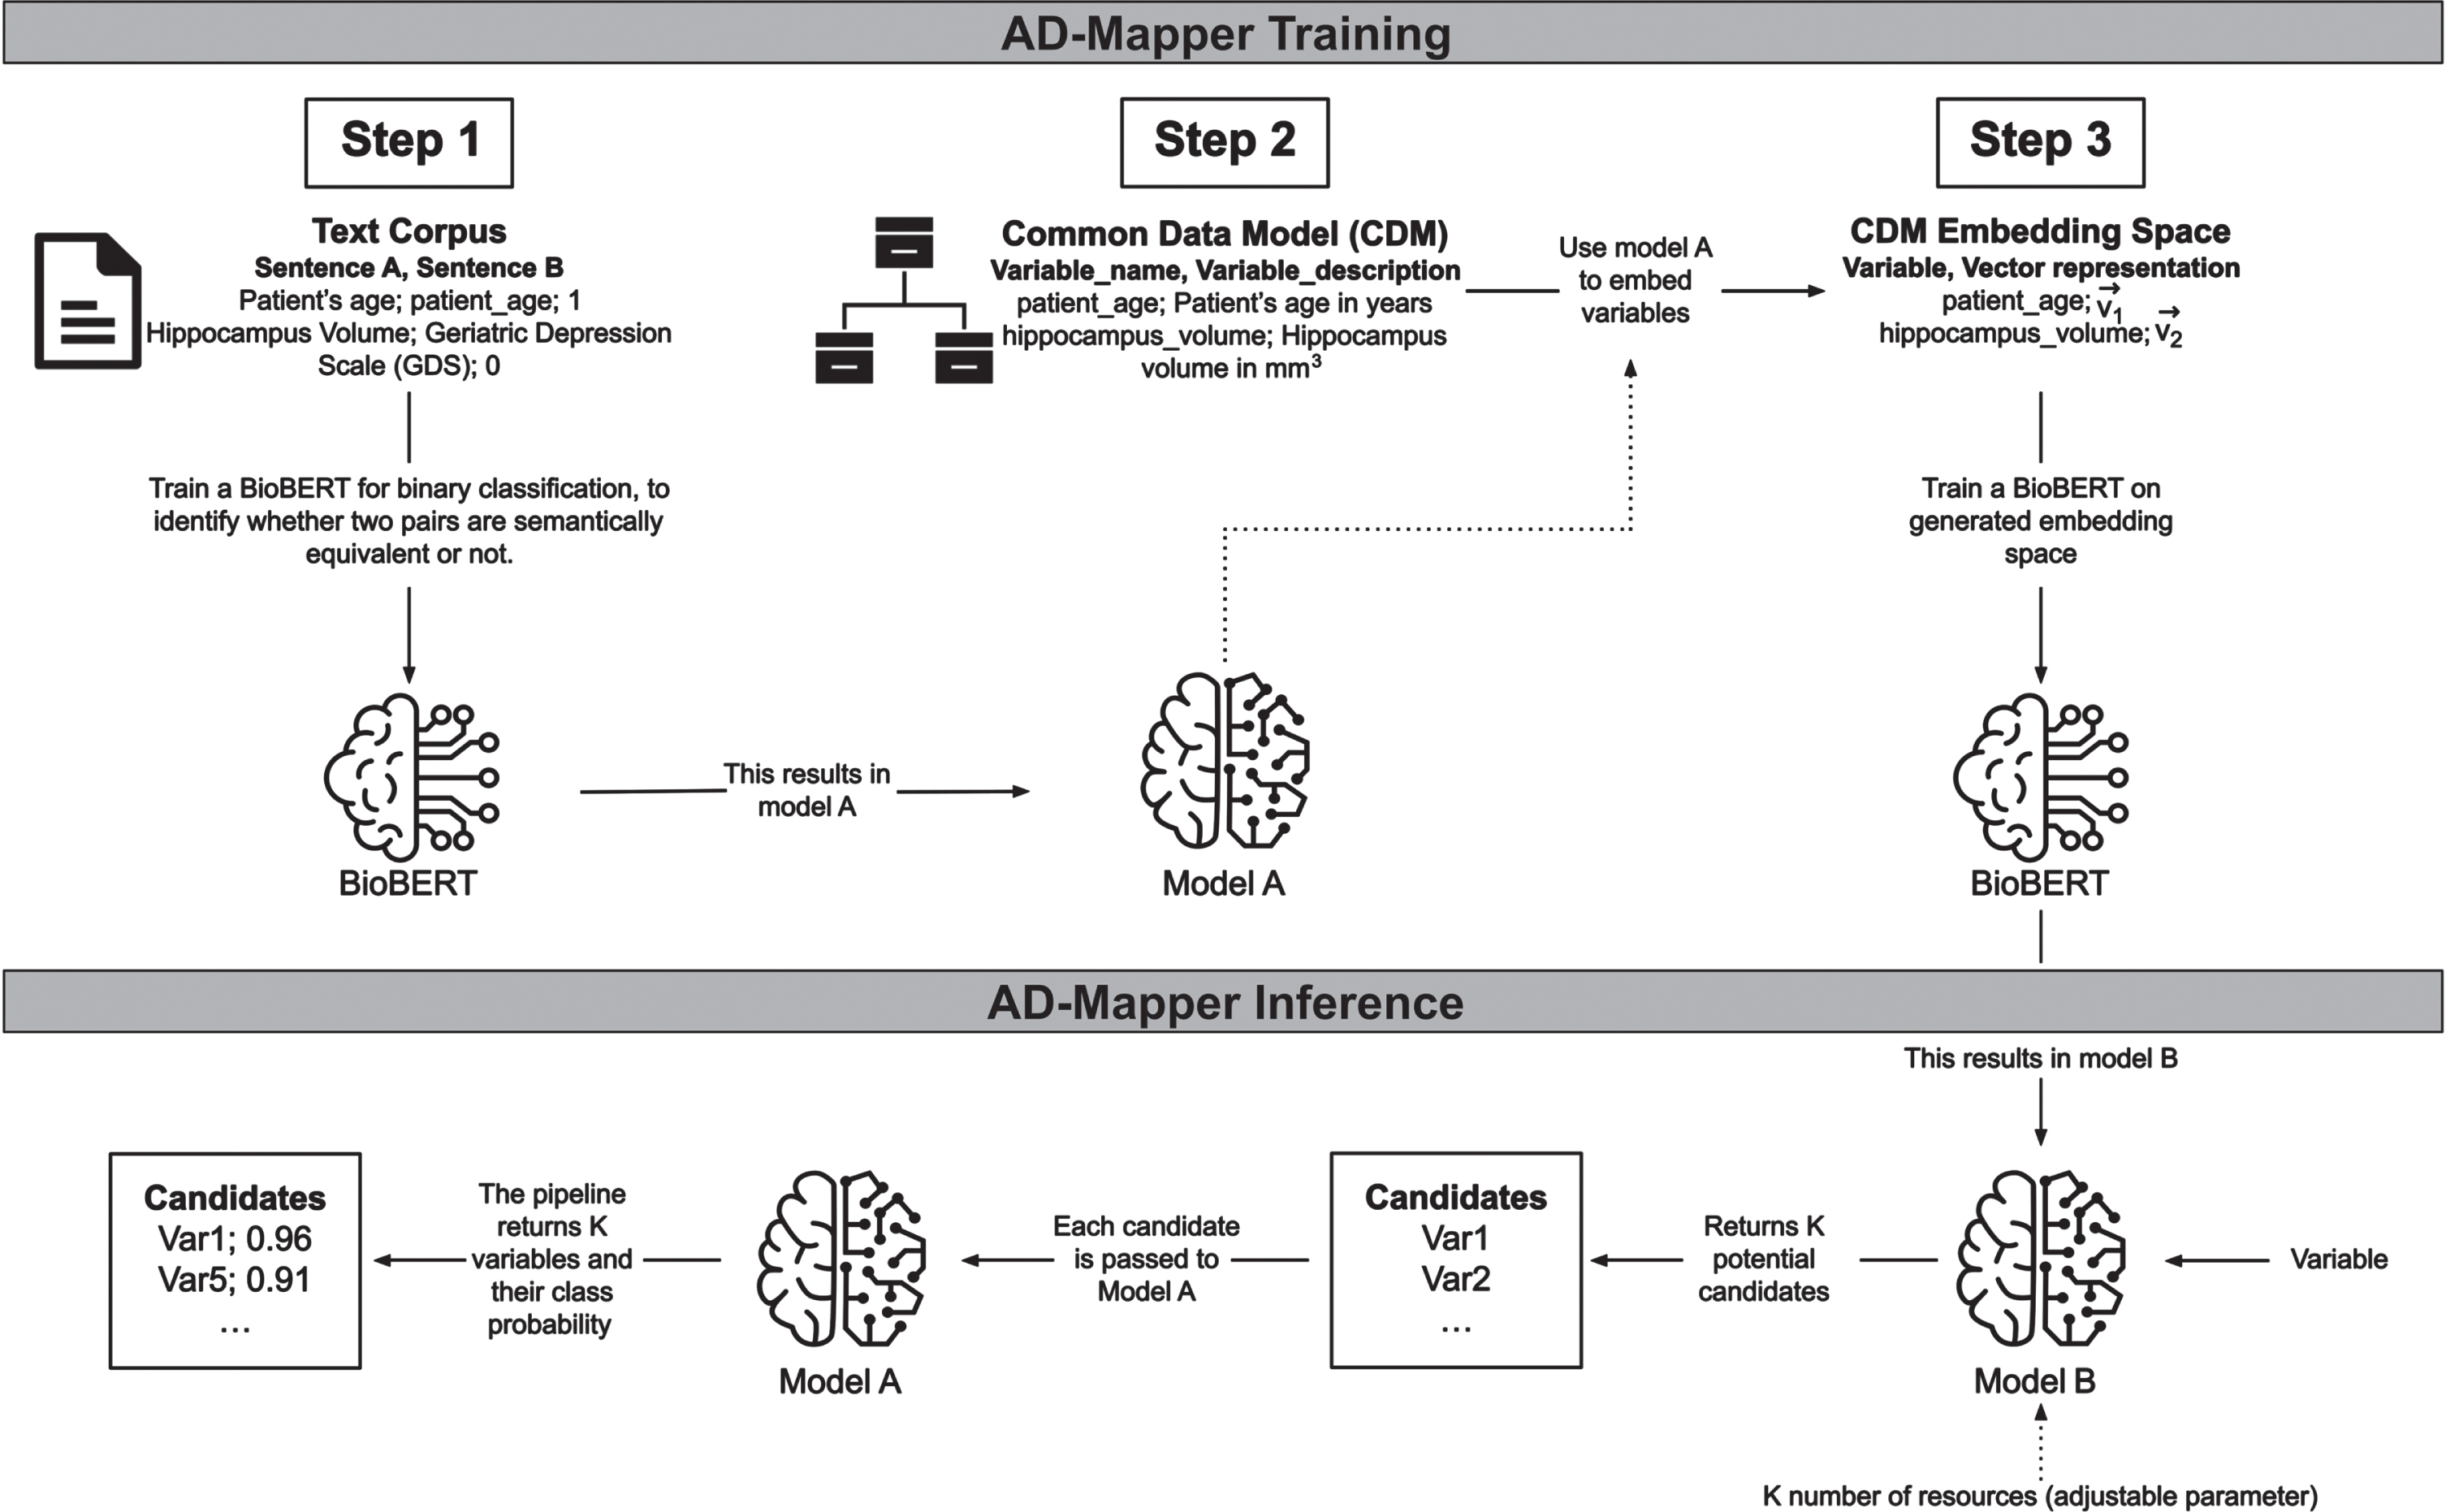 The underlying workflow of the AD-Mapper tool. Training the AD-Mapper consists of three steps: training BioBERT (i.e., Model A) on a text corpus, retrieving the names and descriptions from the CDM, and generating the embeddings. Then, the inference step comprises using Model B and A to generate a ranking of potential candidates and calculating the probabilities of positive mappings, respectively.